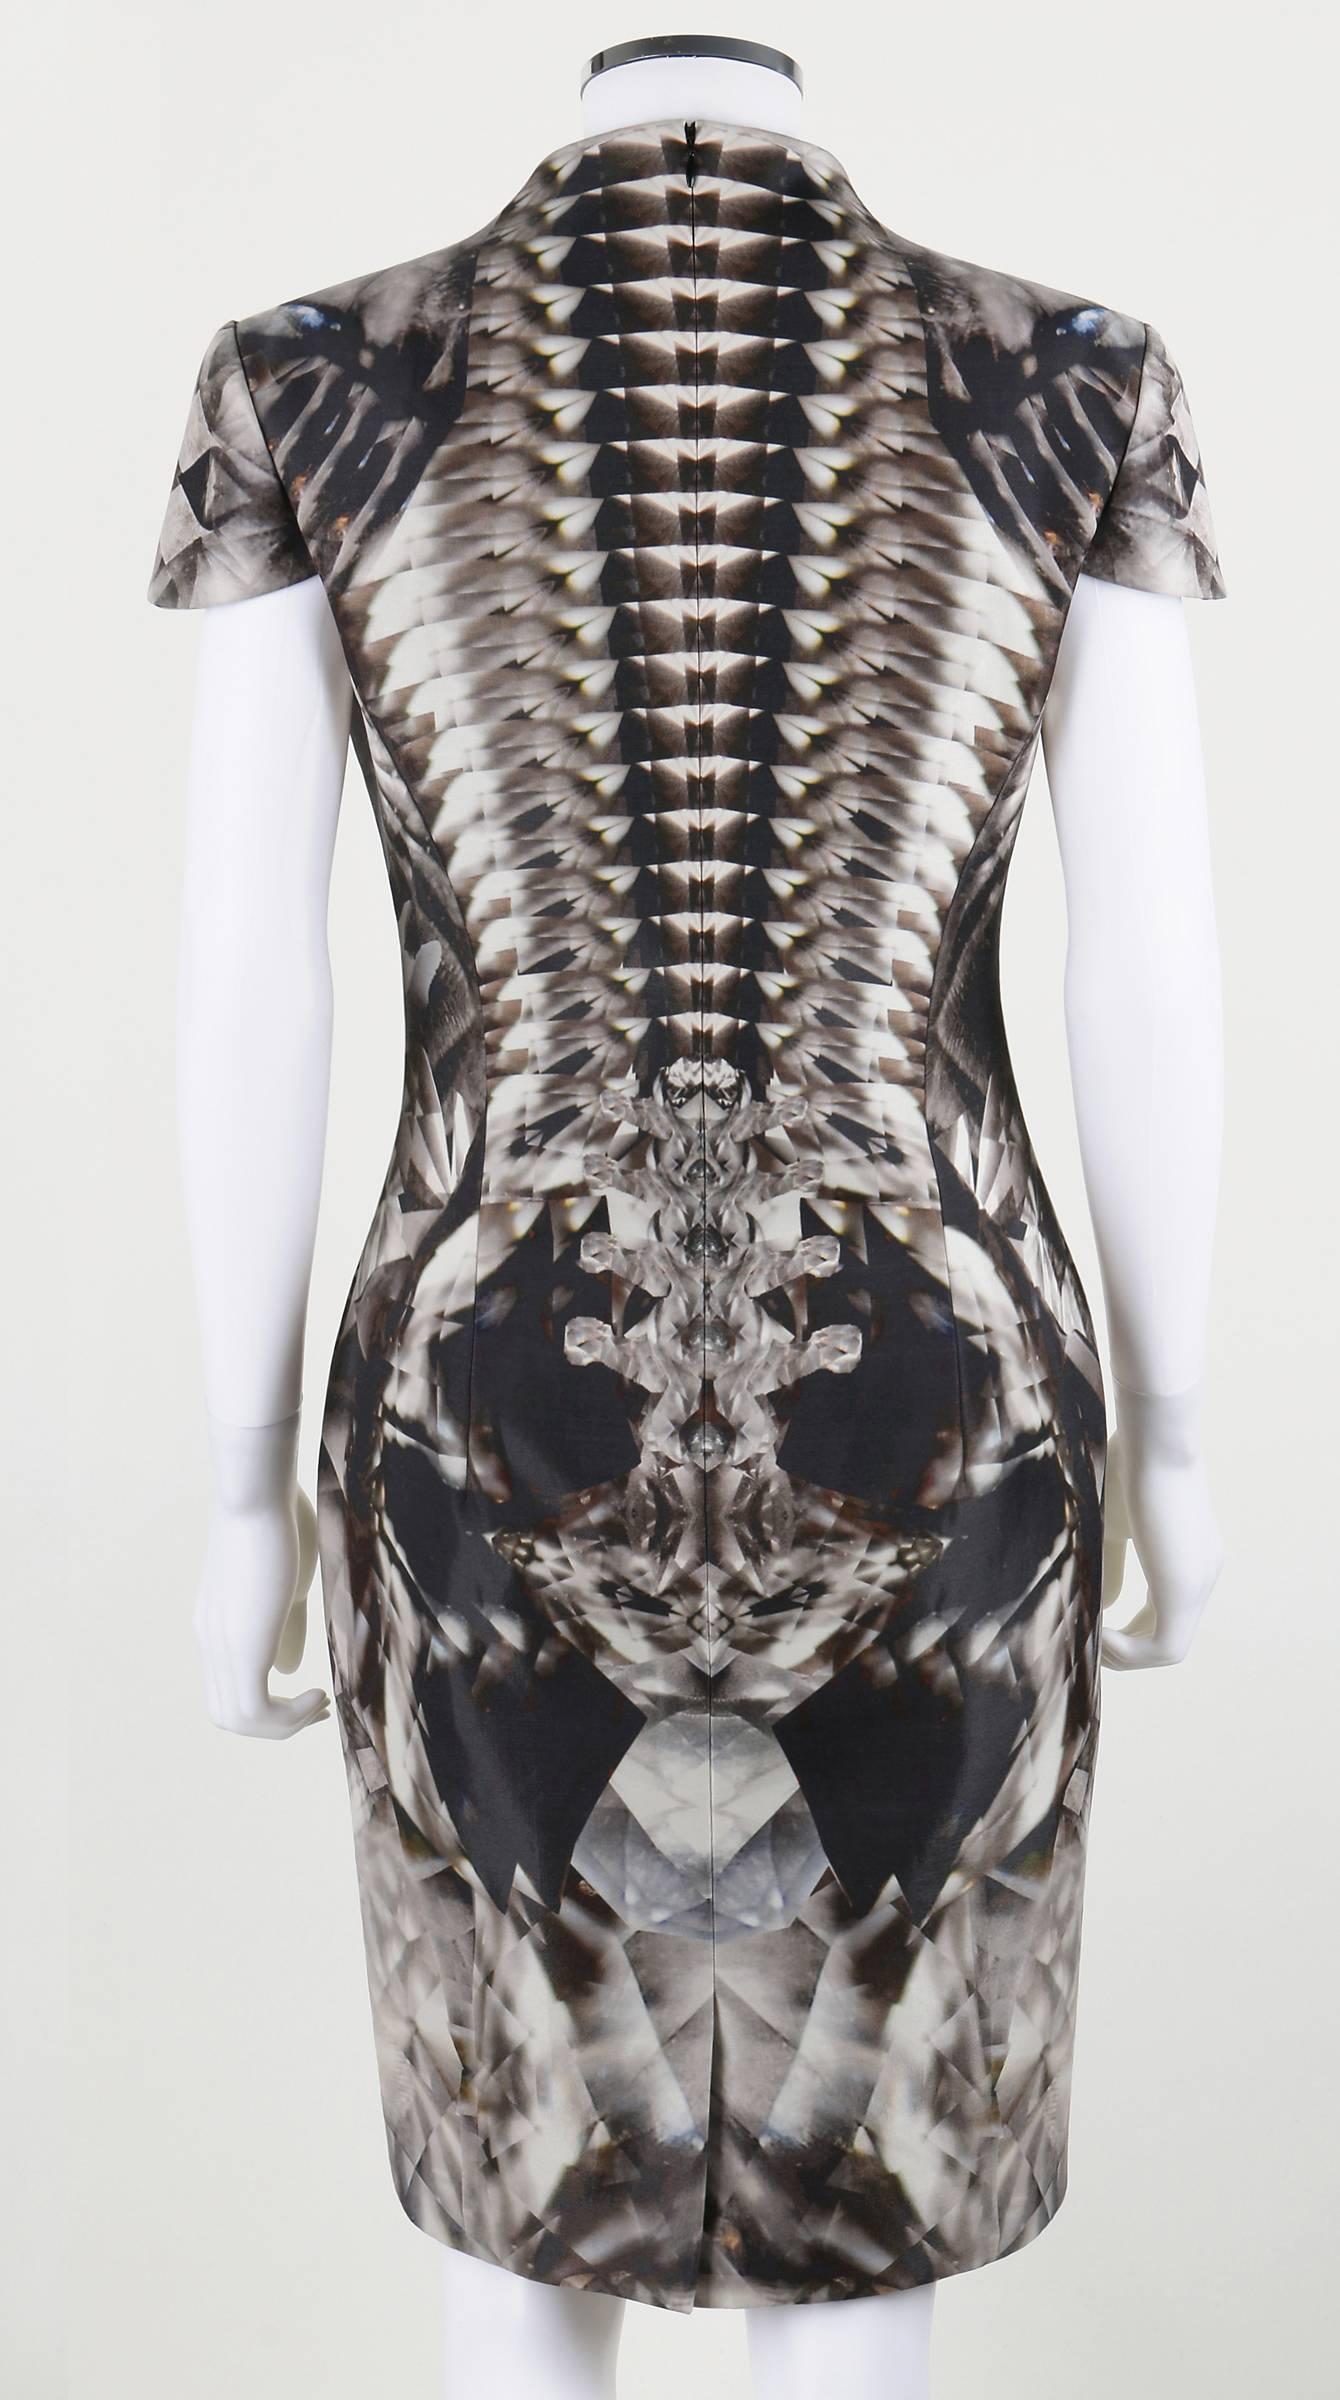 Rare and iconic skeletal kaleidoscope print dress from Alexander McQueen's Spring-Summer 2009 